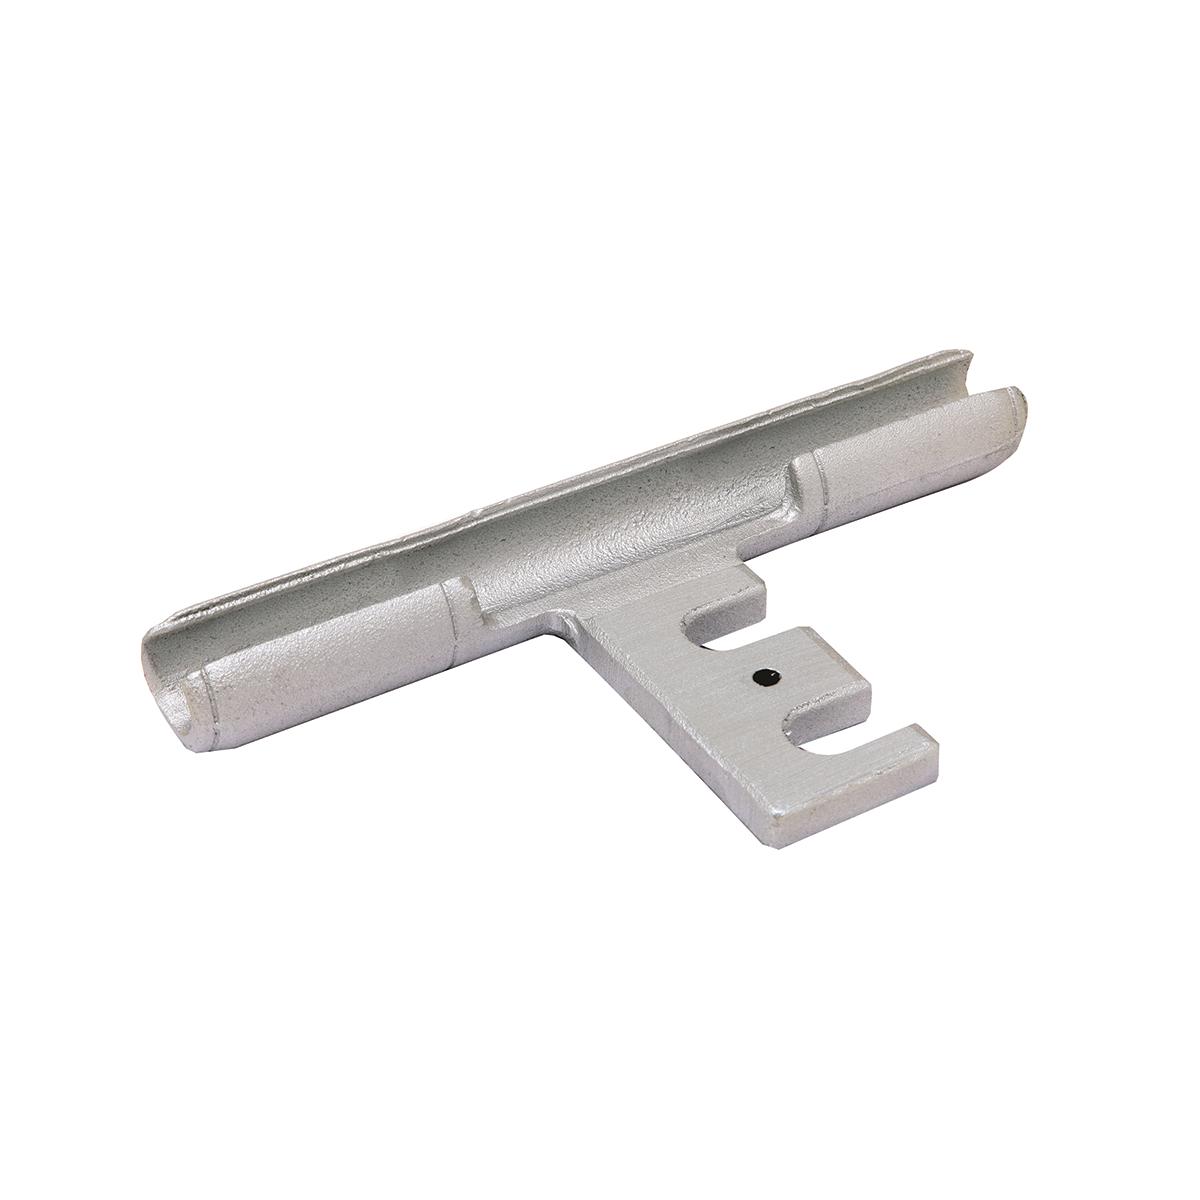 Hubbell YTA321R2N AL primary T-tap connector with slotted tap pad designed for easy disconnecting of tap conductor, For use with Types YKA-R-2N and YKA-A-2N, Barrell Length: 4.97 IN H.  ; Features: Aluminum Primary T-Tap Connector With Slotted Tap Pad Designed For Easy Dis